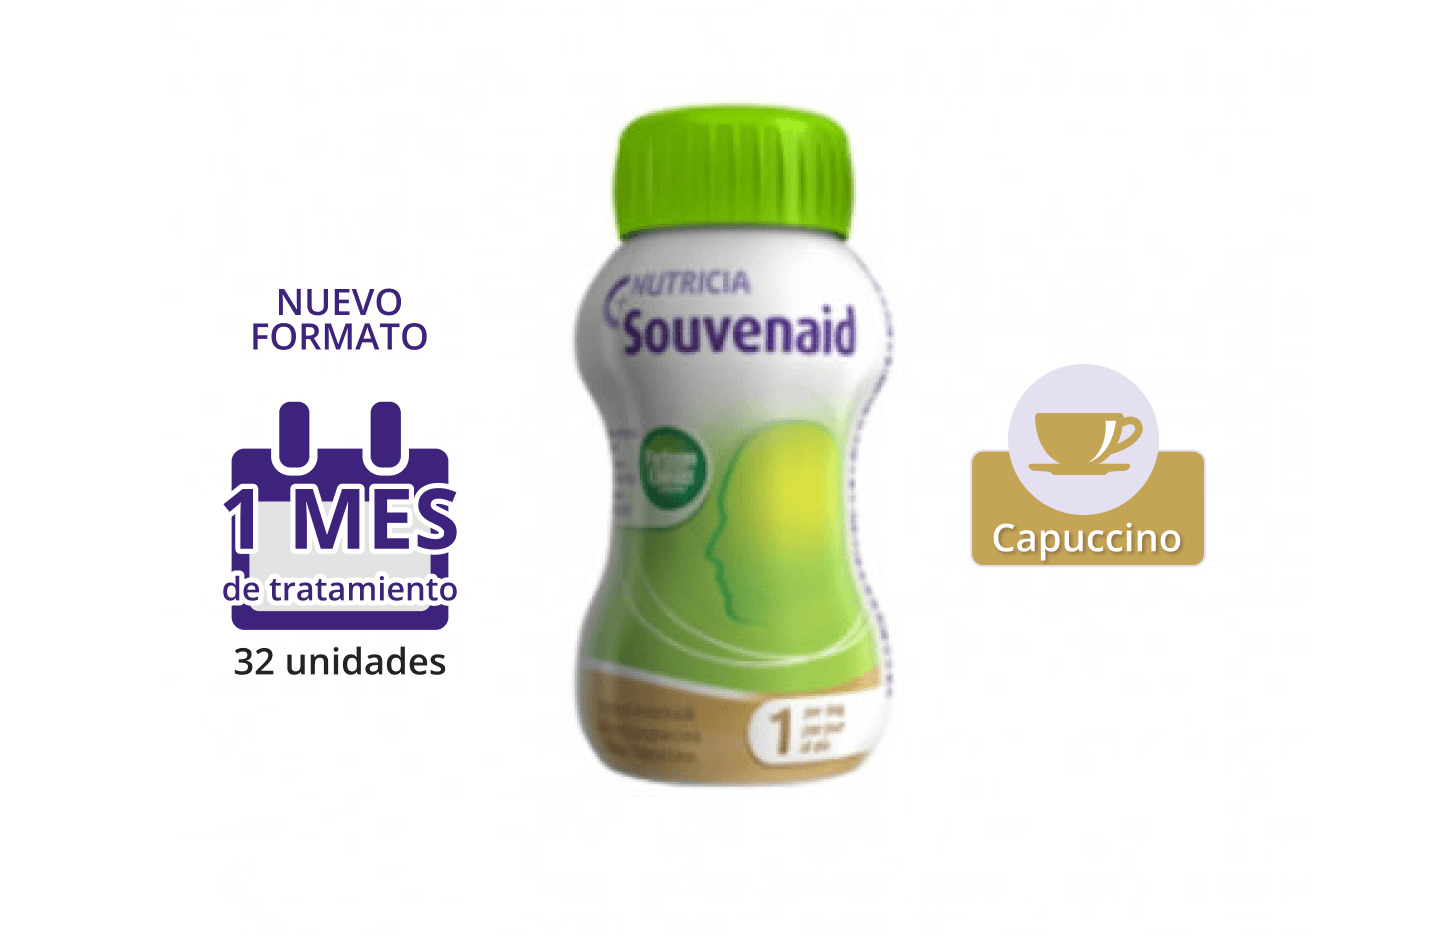 A bottle of cappuccino flavoured Souvenaid with health authority stickers.